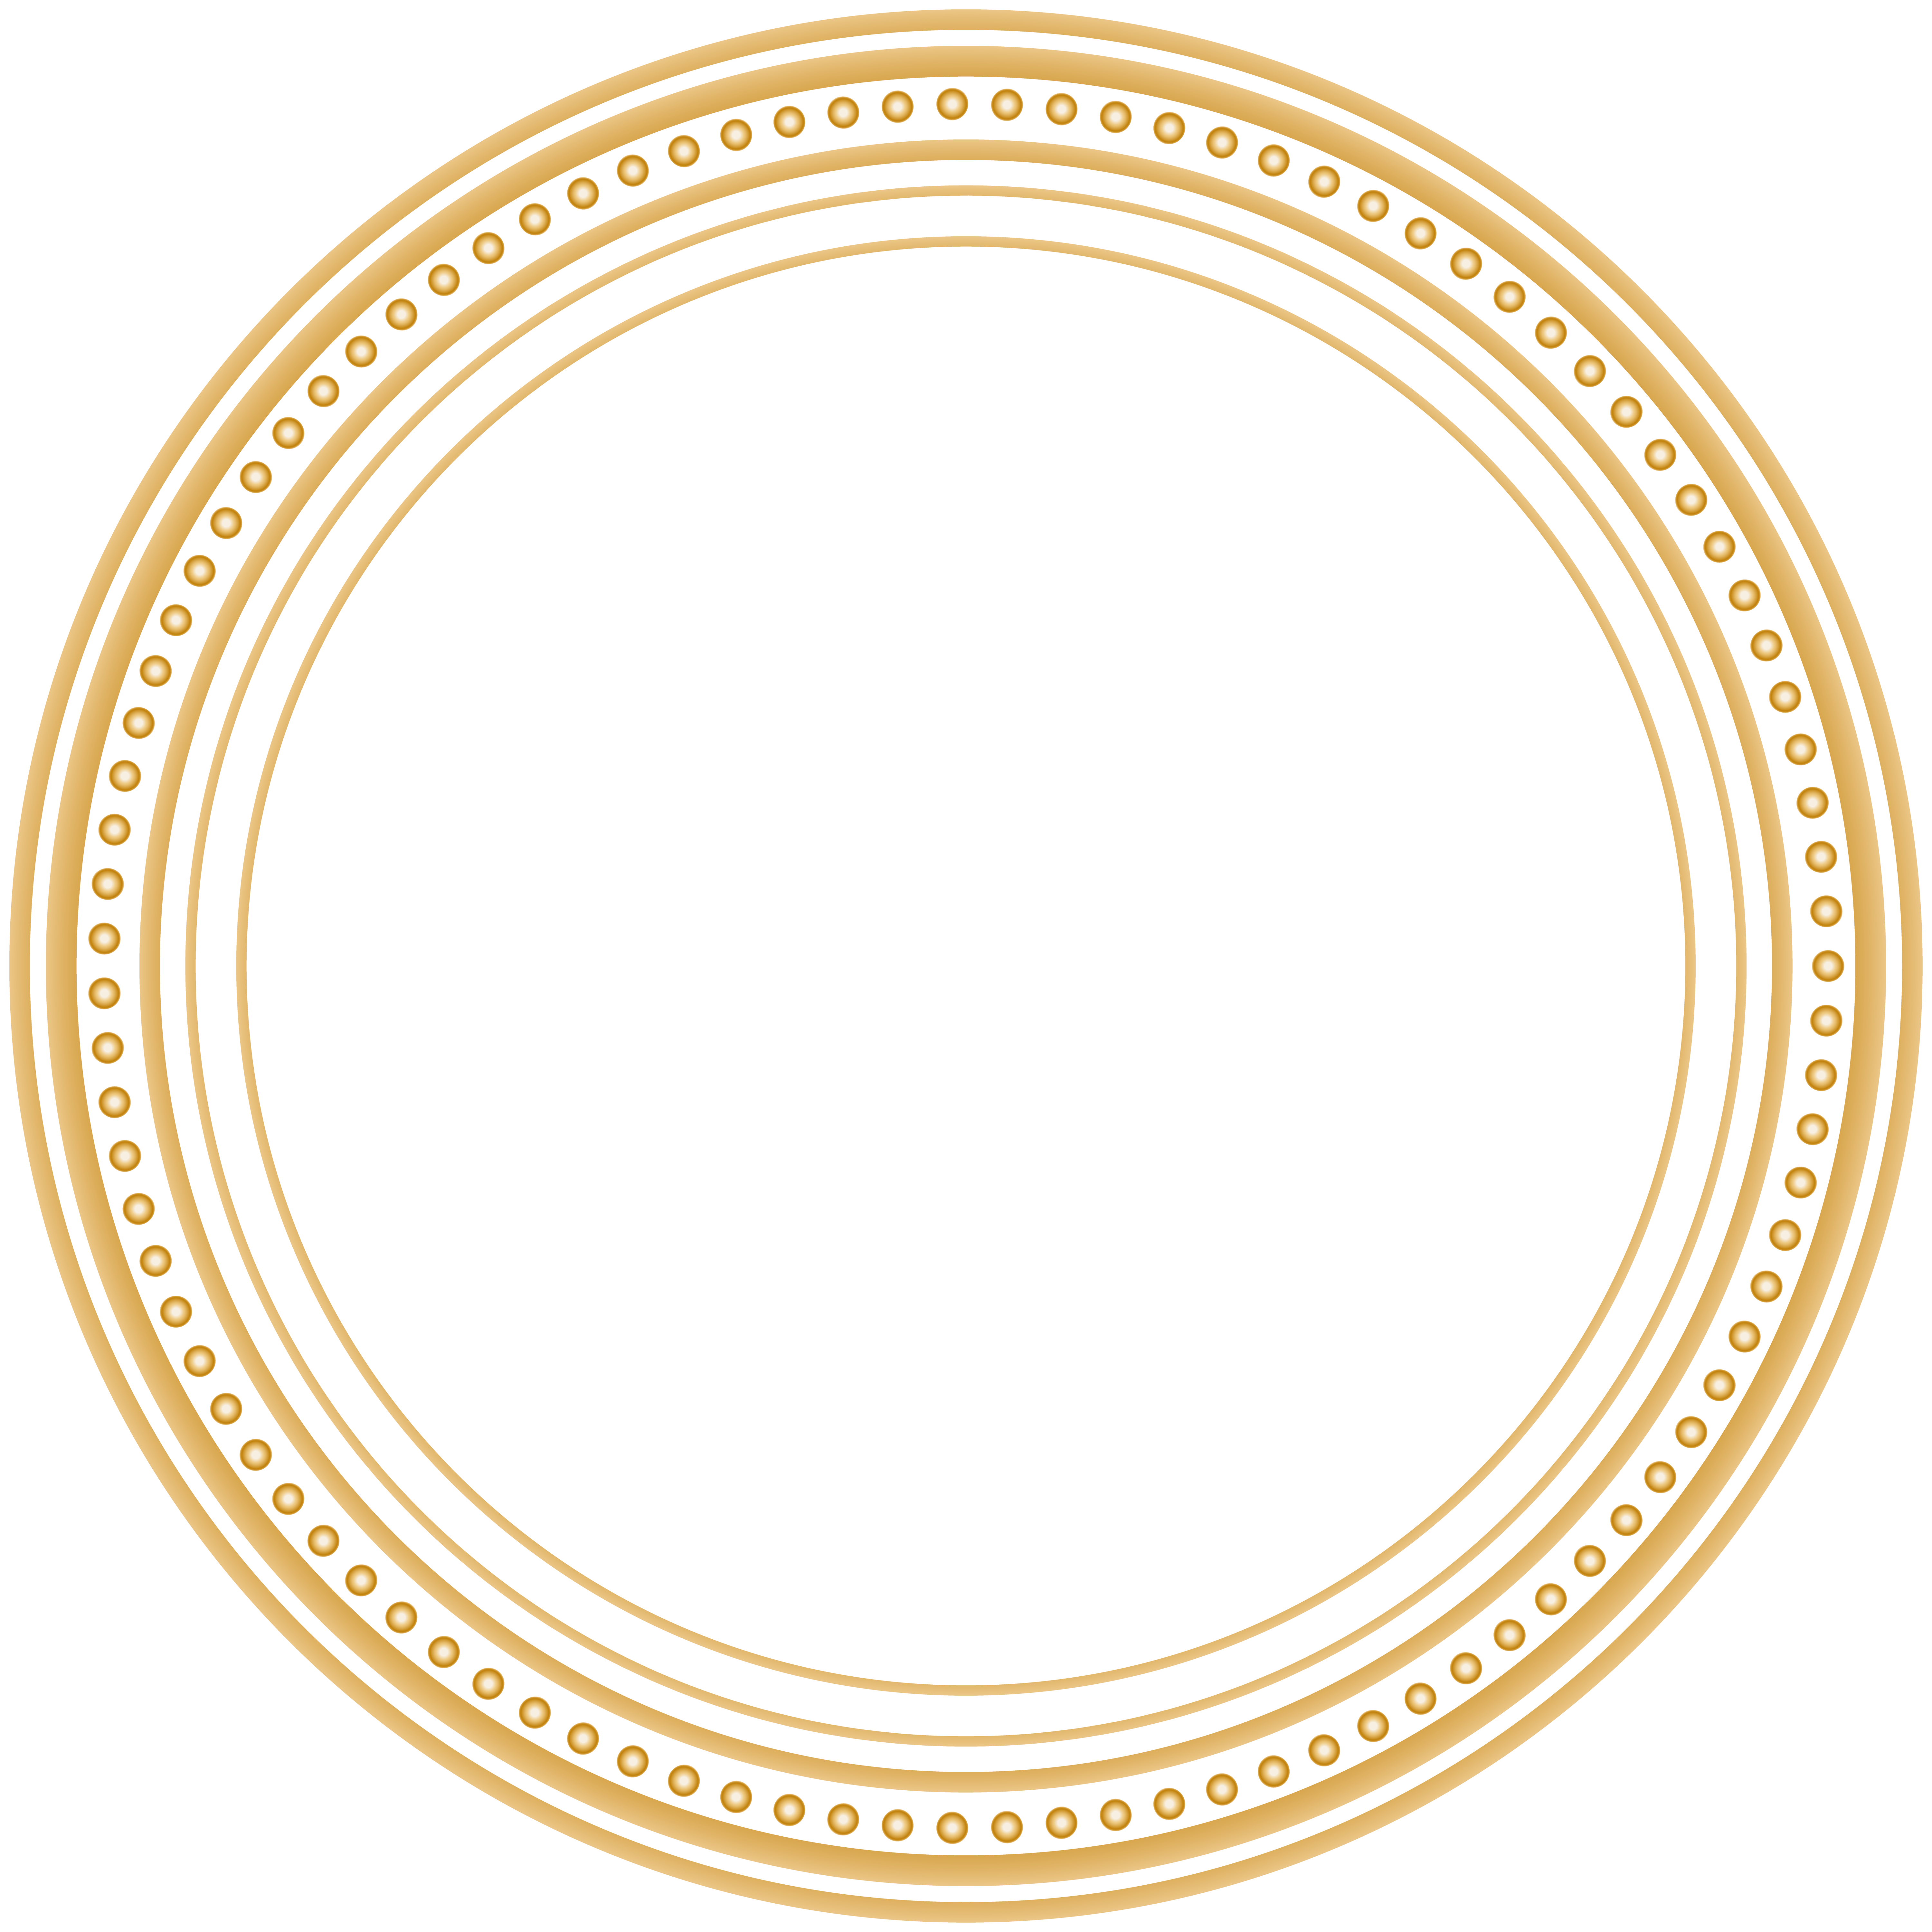 Round Frame Clip Art PNG Image | Gallery Yopriceville - High-Quality